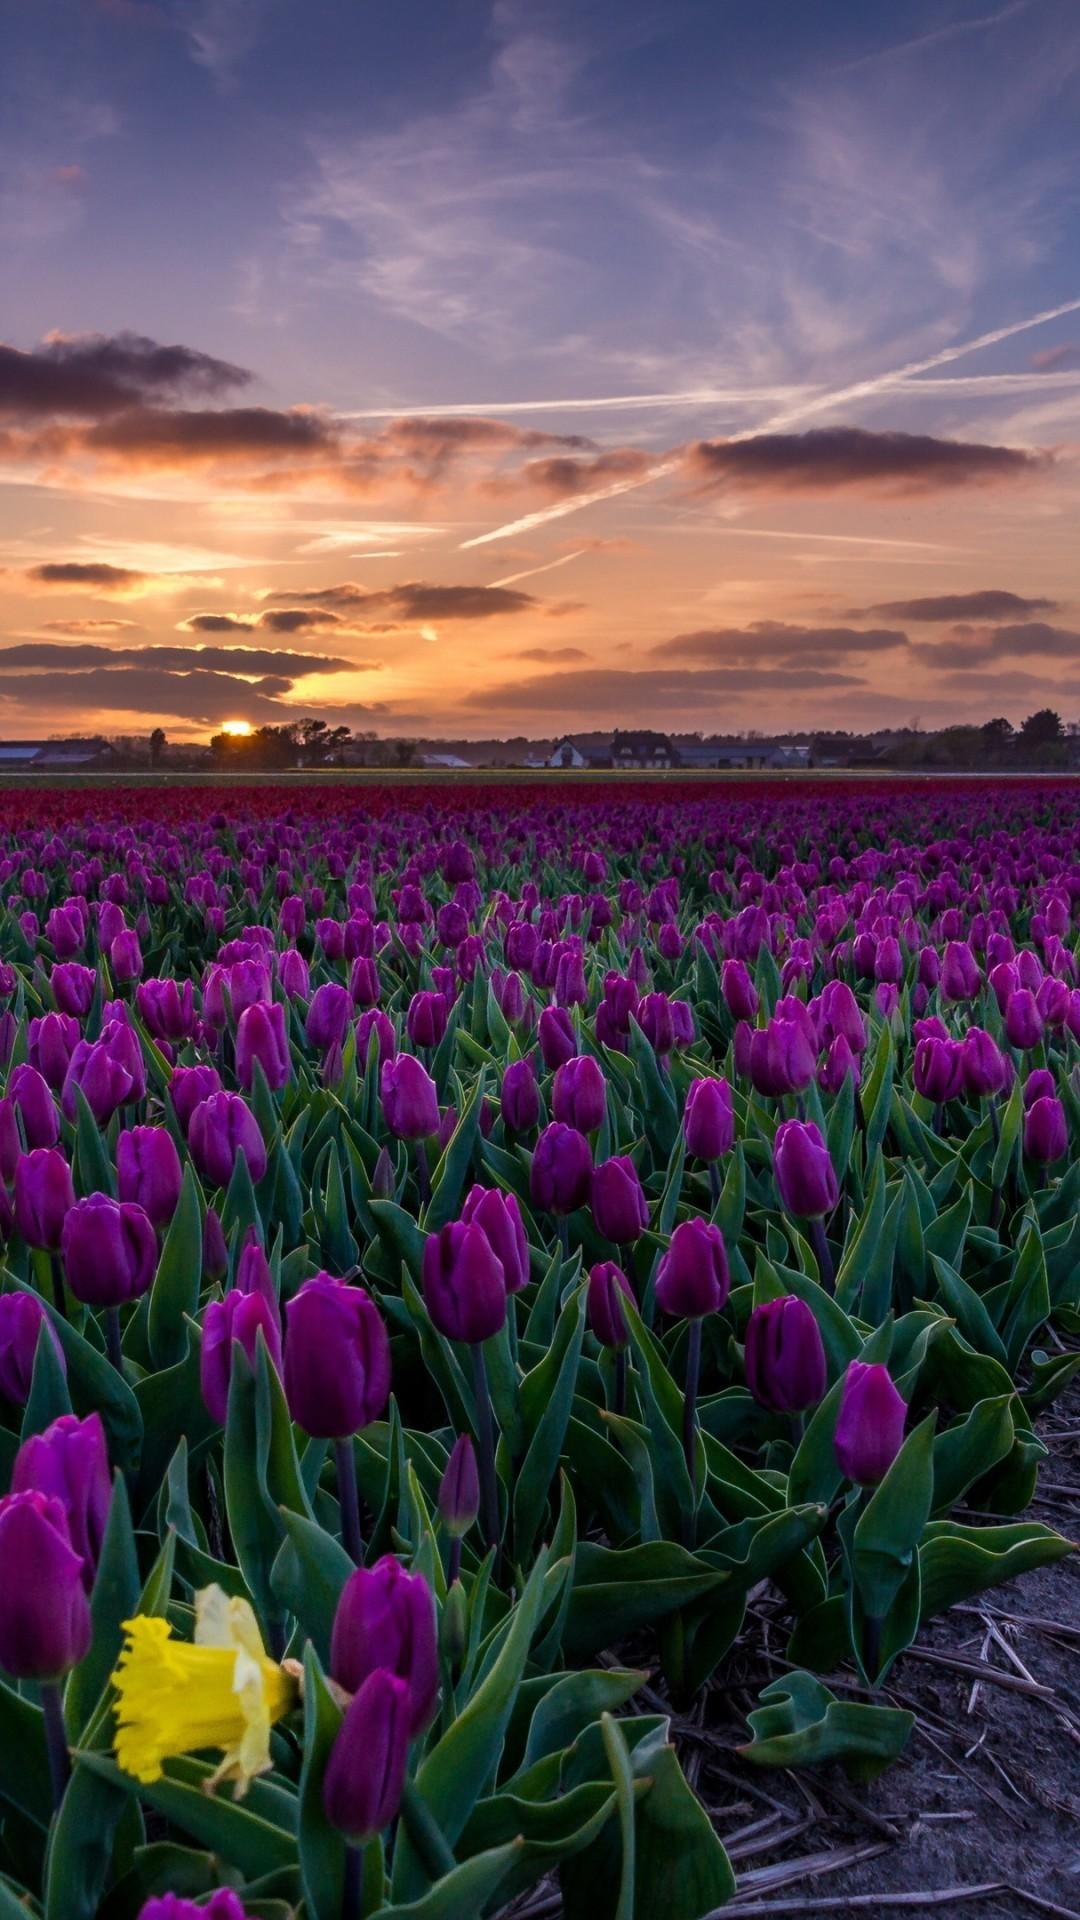 A field of purple flowers with one yellow flower - Tulip